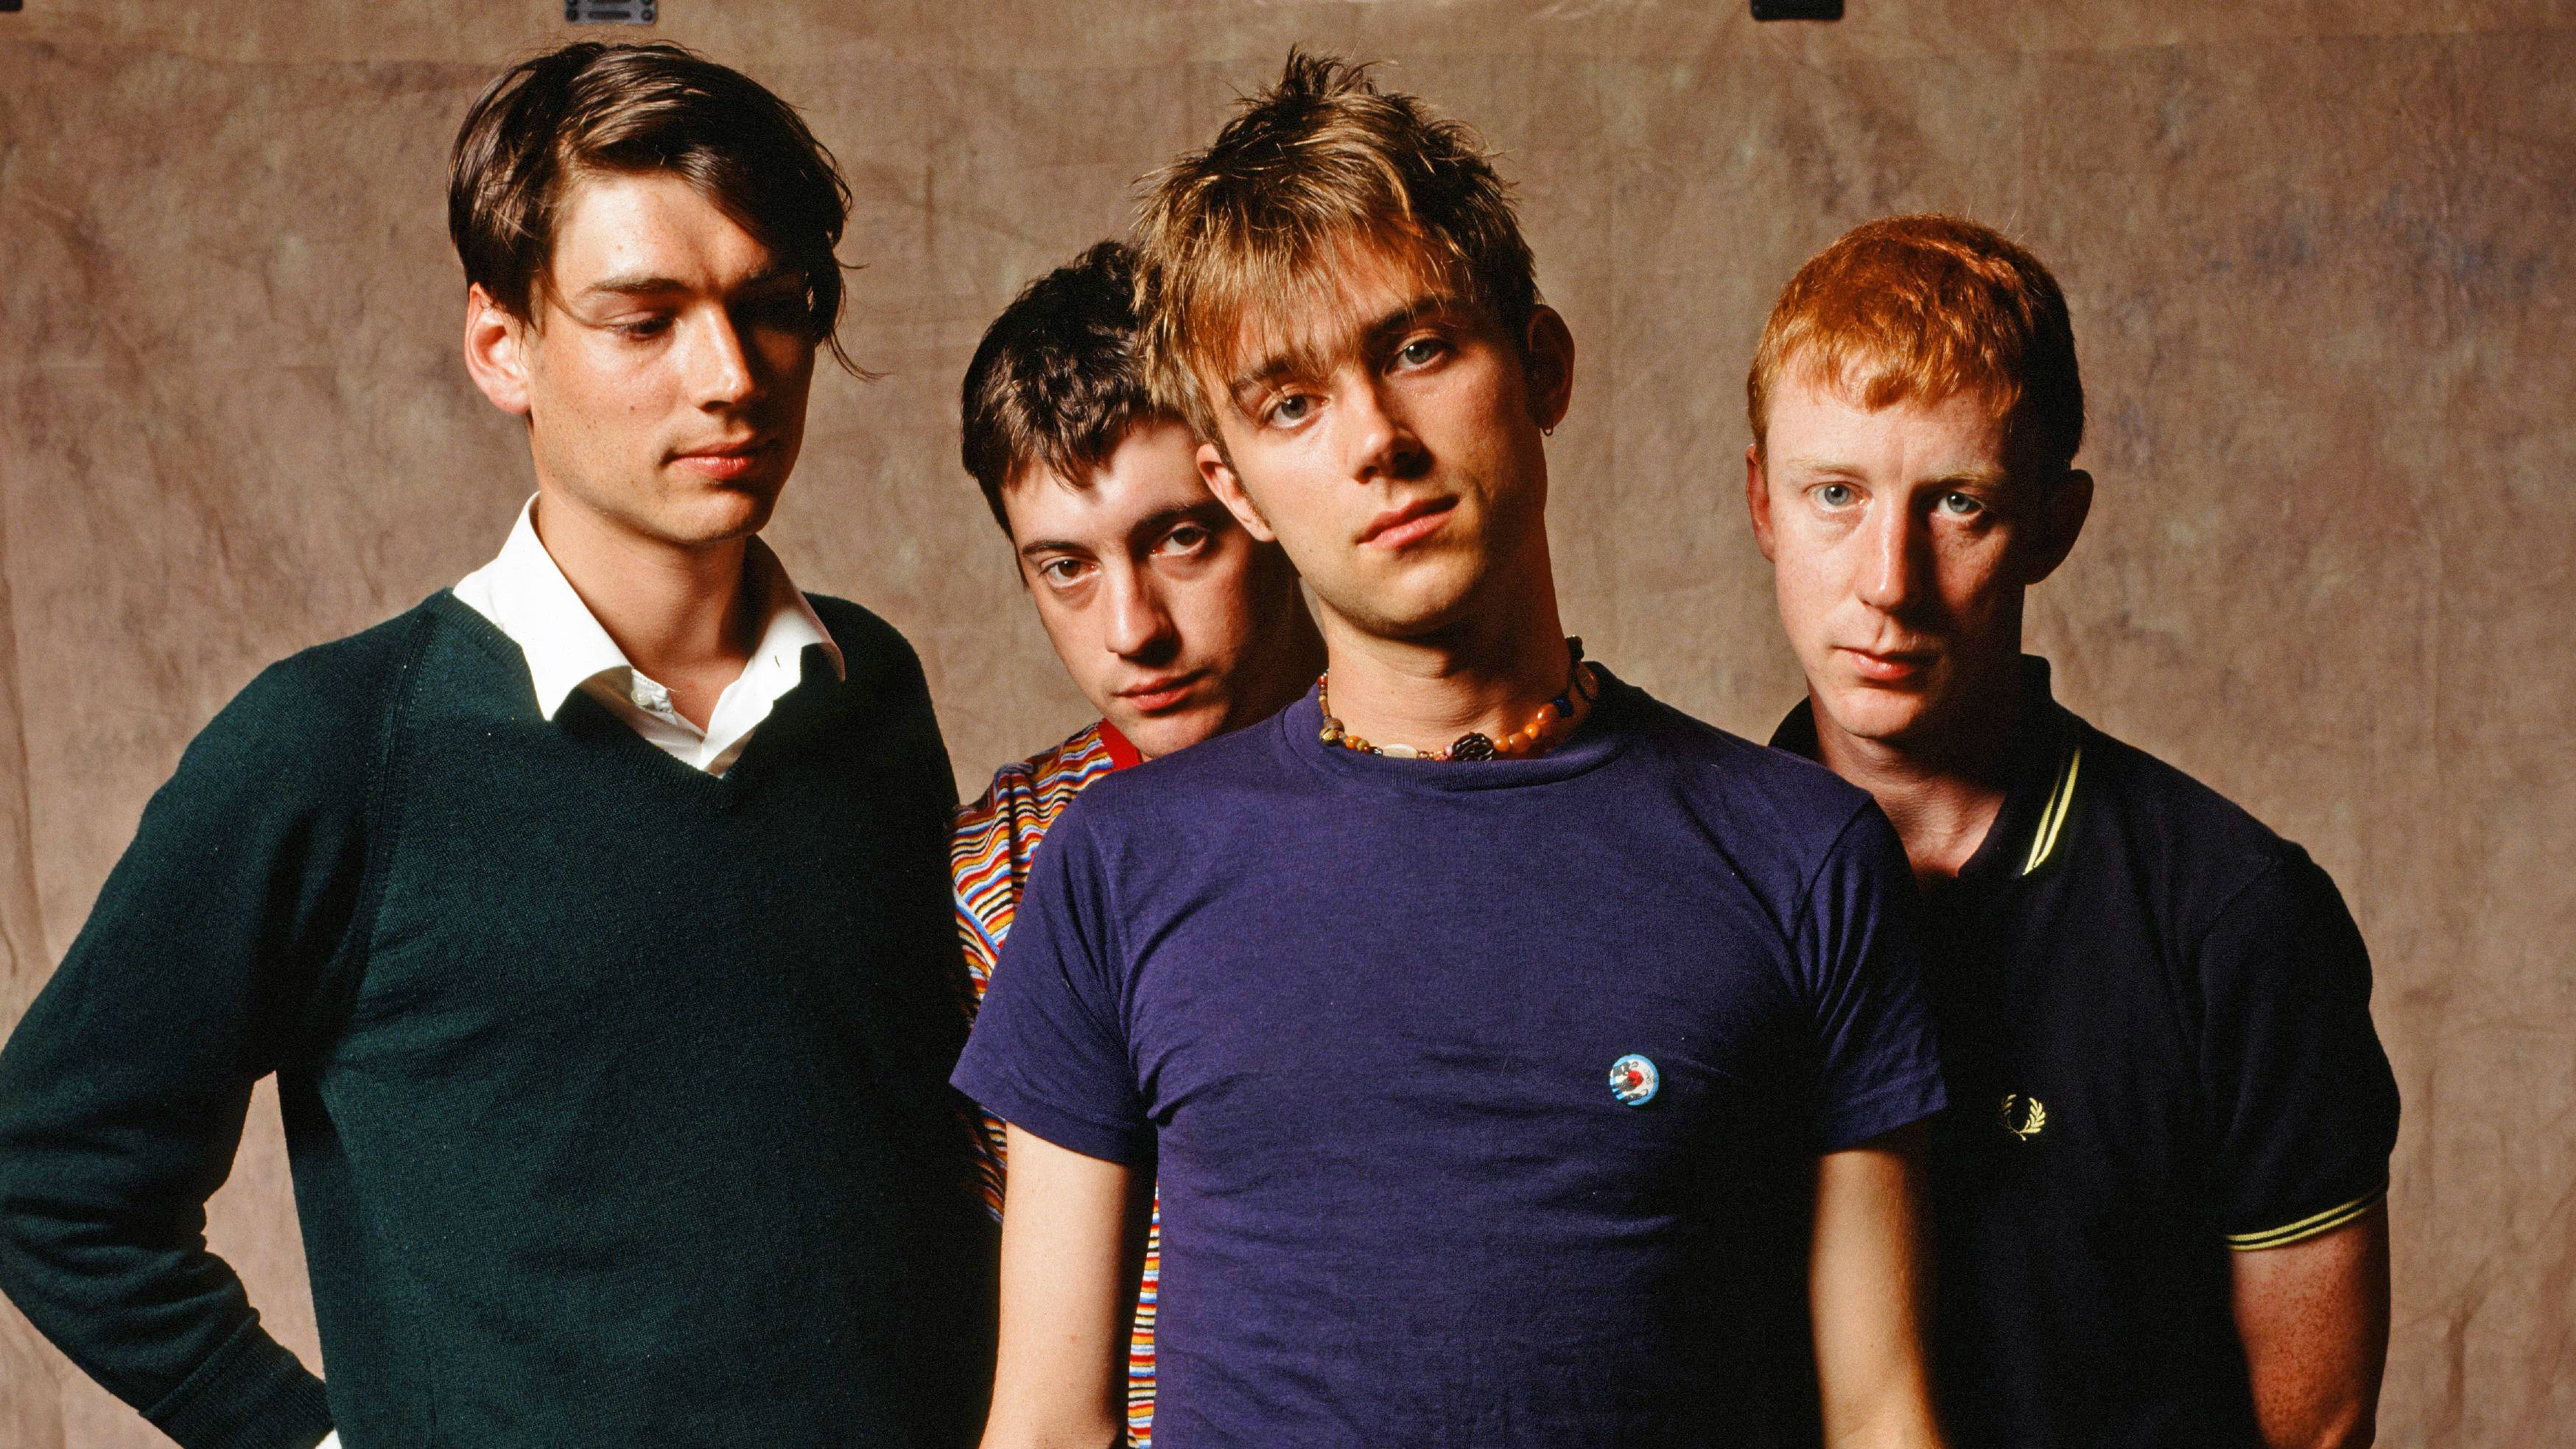 QUIZ: How well do you know the words to Parklife by Blur? - Radio X